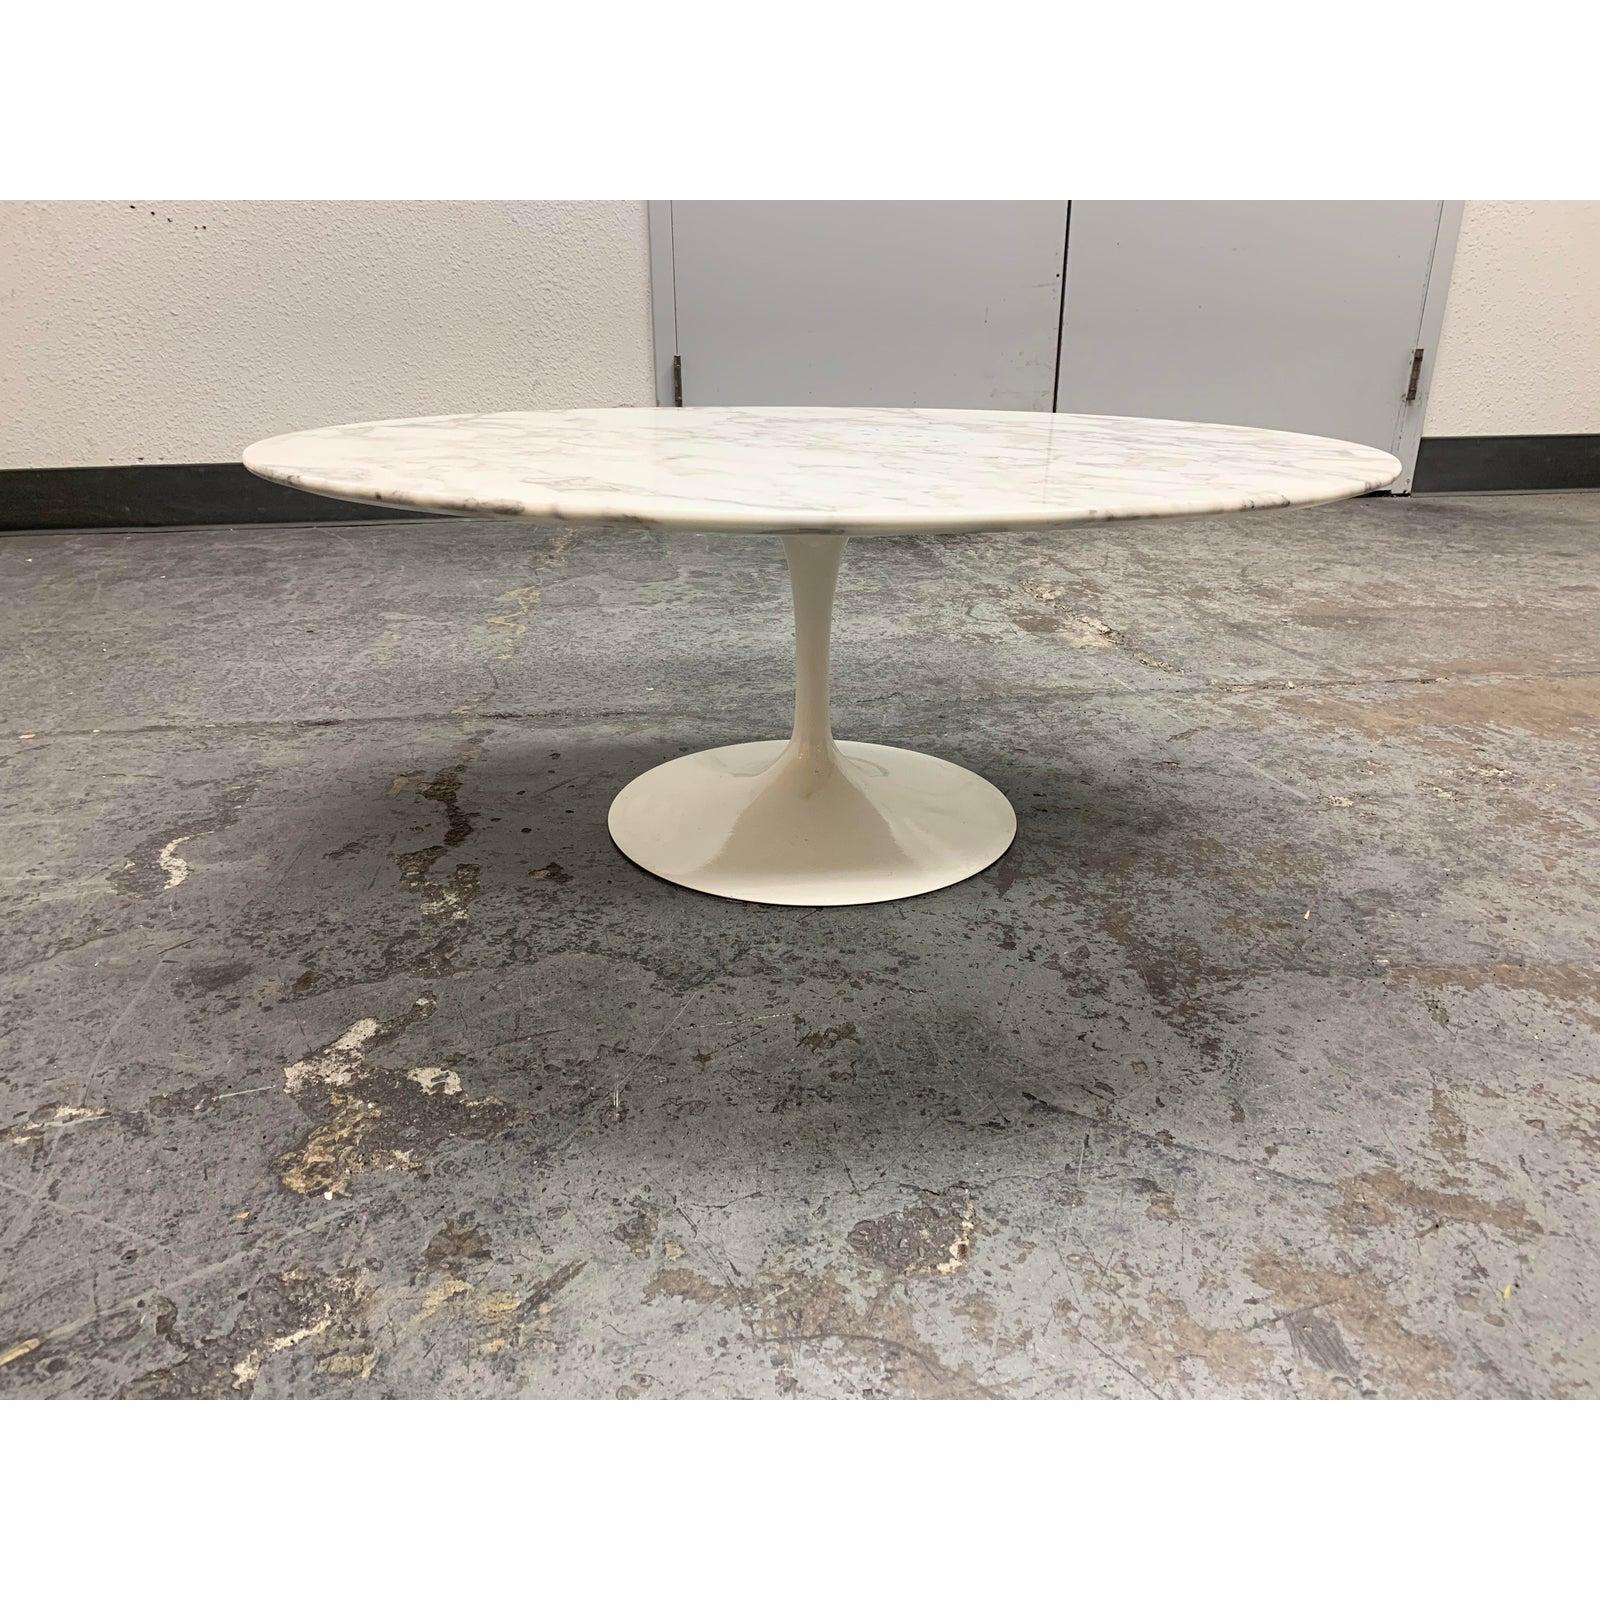 Presents a Saarinen low oval coffee table by Knoll. Designed by Eero Saarinen in 1956. In a 1956 Time magazine cover story, Eero Saarinen said that “the underside of typical tables and chairs makes a confusing, unrestful world” and he was designing